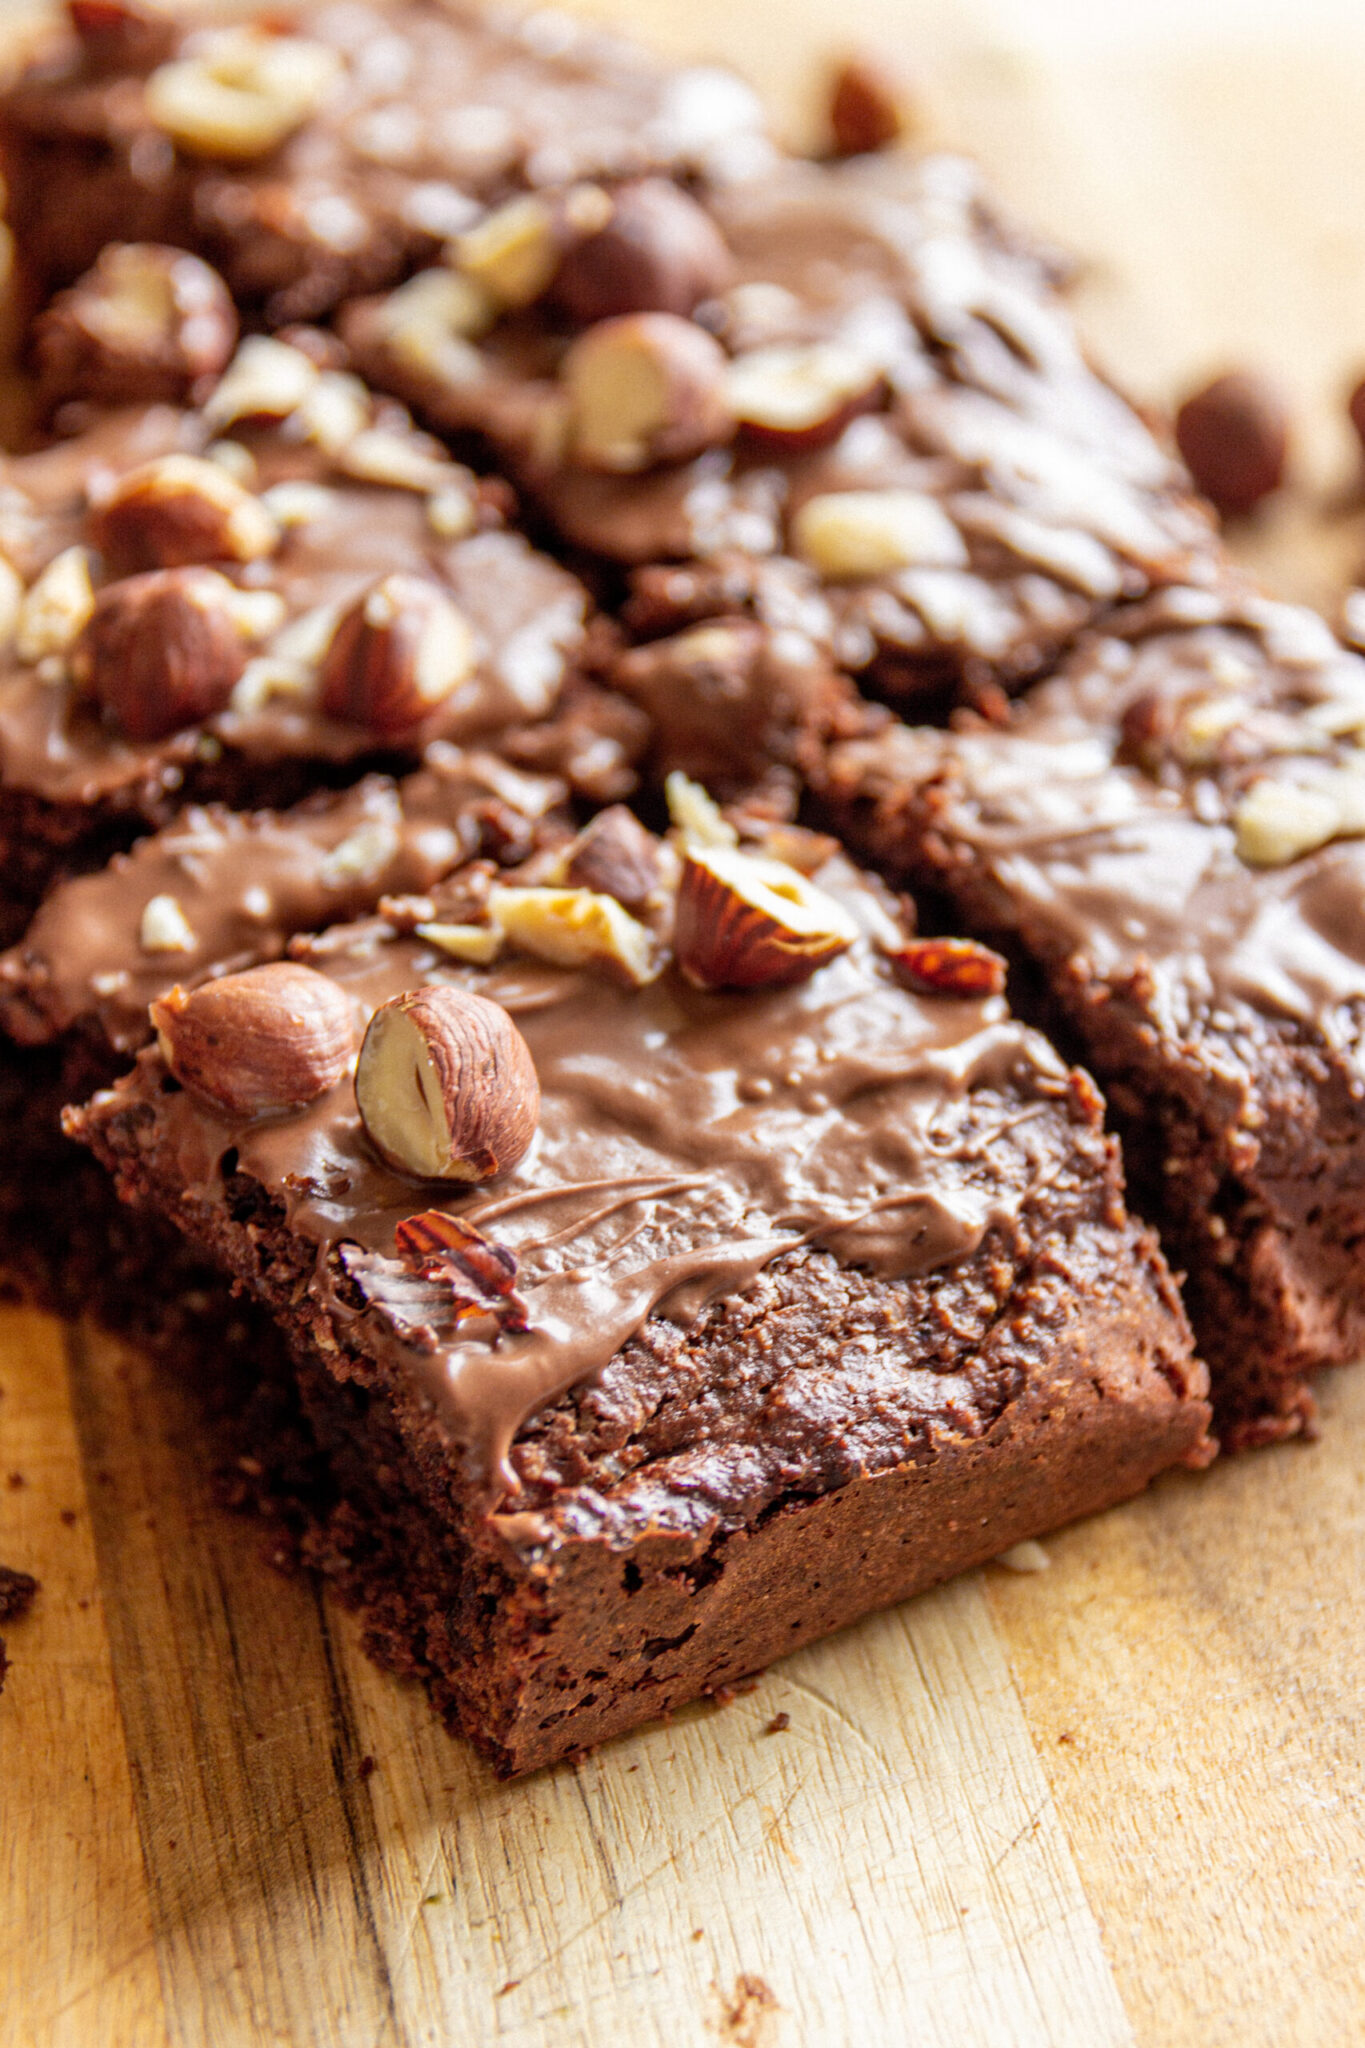 Vegan Nutella Brownies With Hazelnuts Healthyfrenchwife